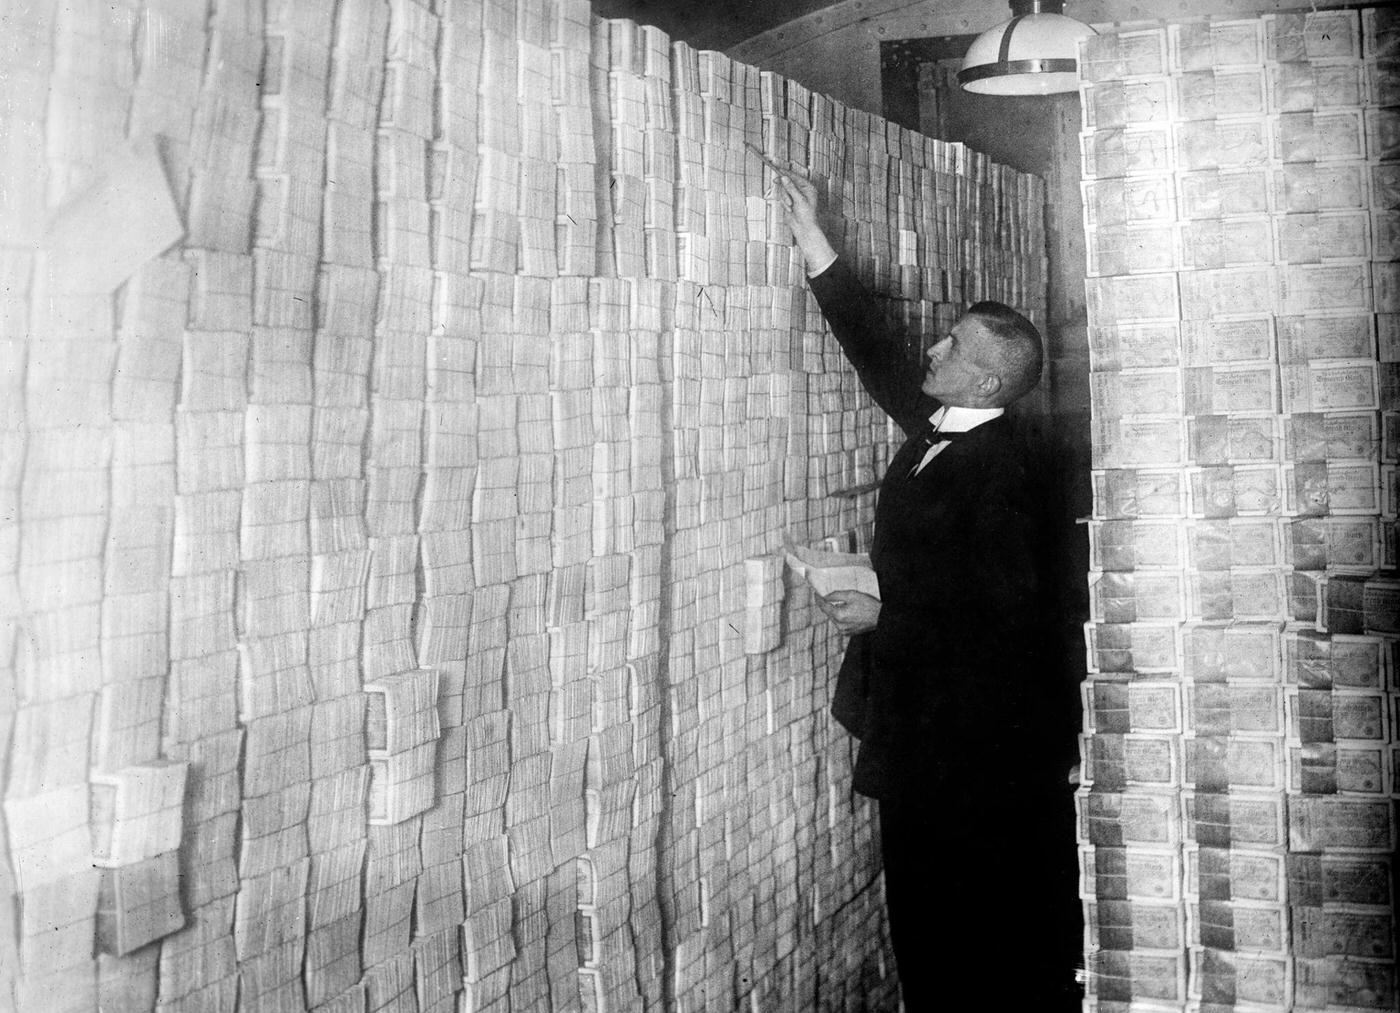 Banknotes in a bank in Berlin, 1920s